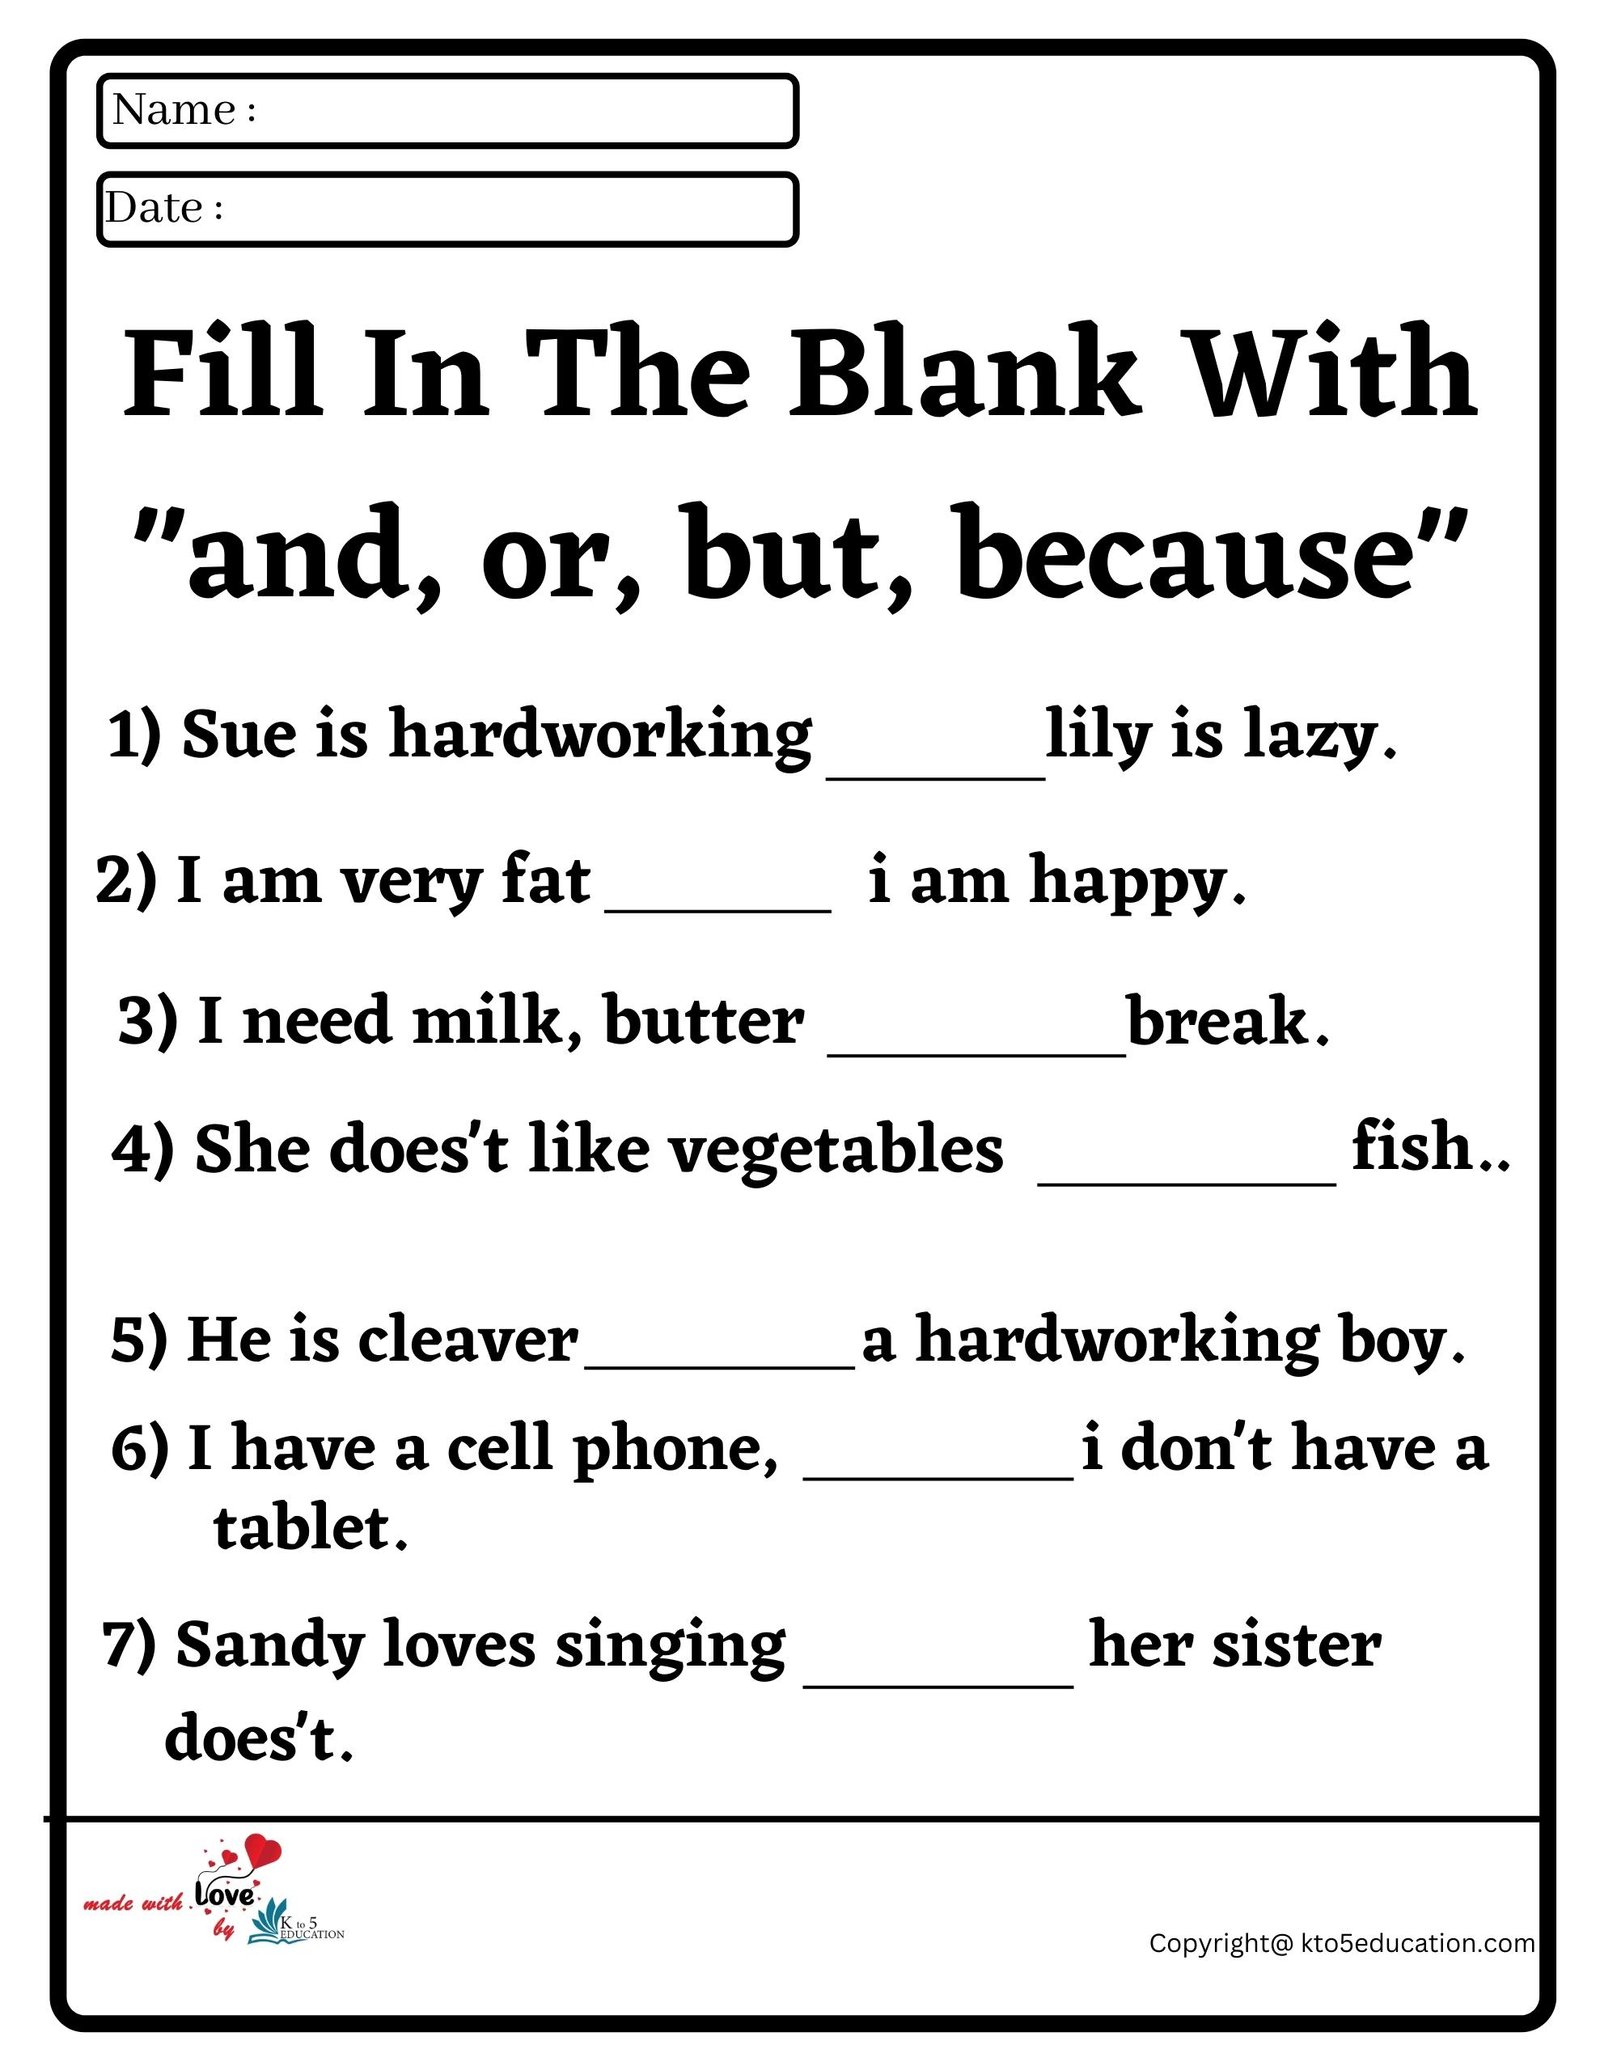 Fill In The Blank With and, or, but, because Worksheet 2